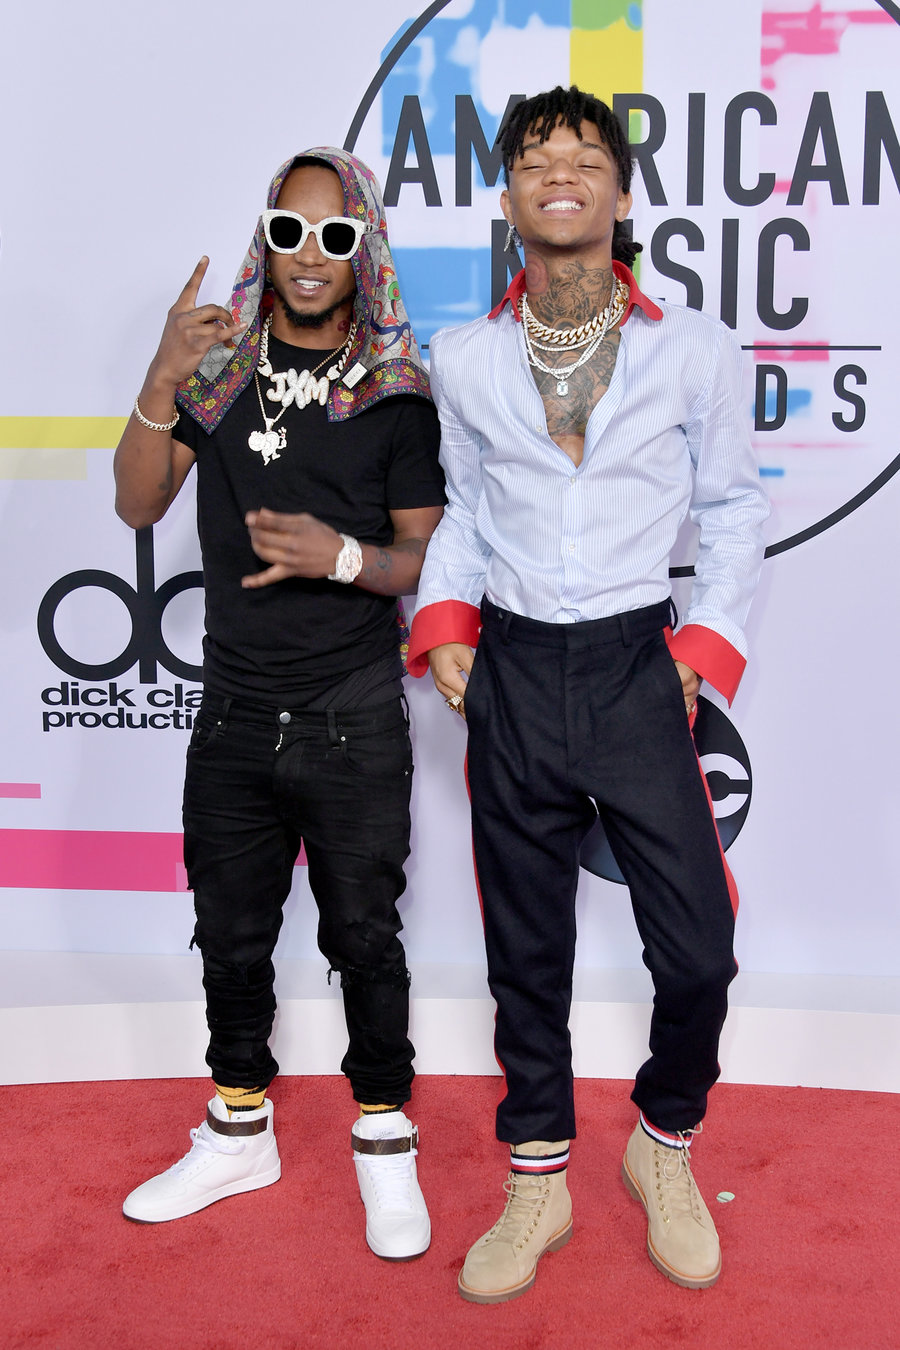 Slim Jimmy and Swae Lee of Rae Sremmurd. Photo by Neilson Barnard for Getty Images